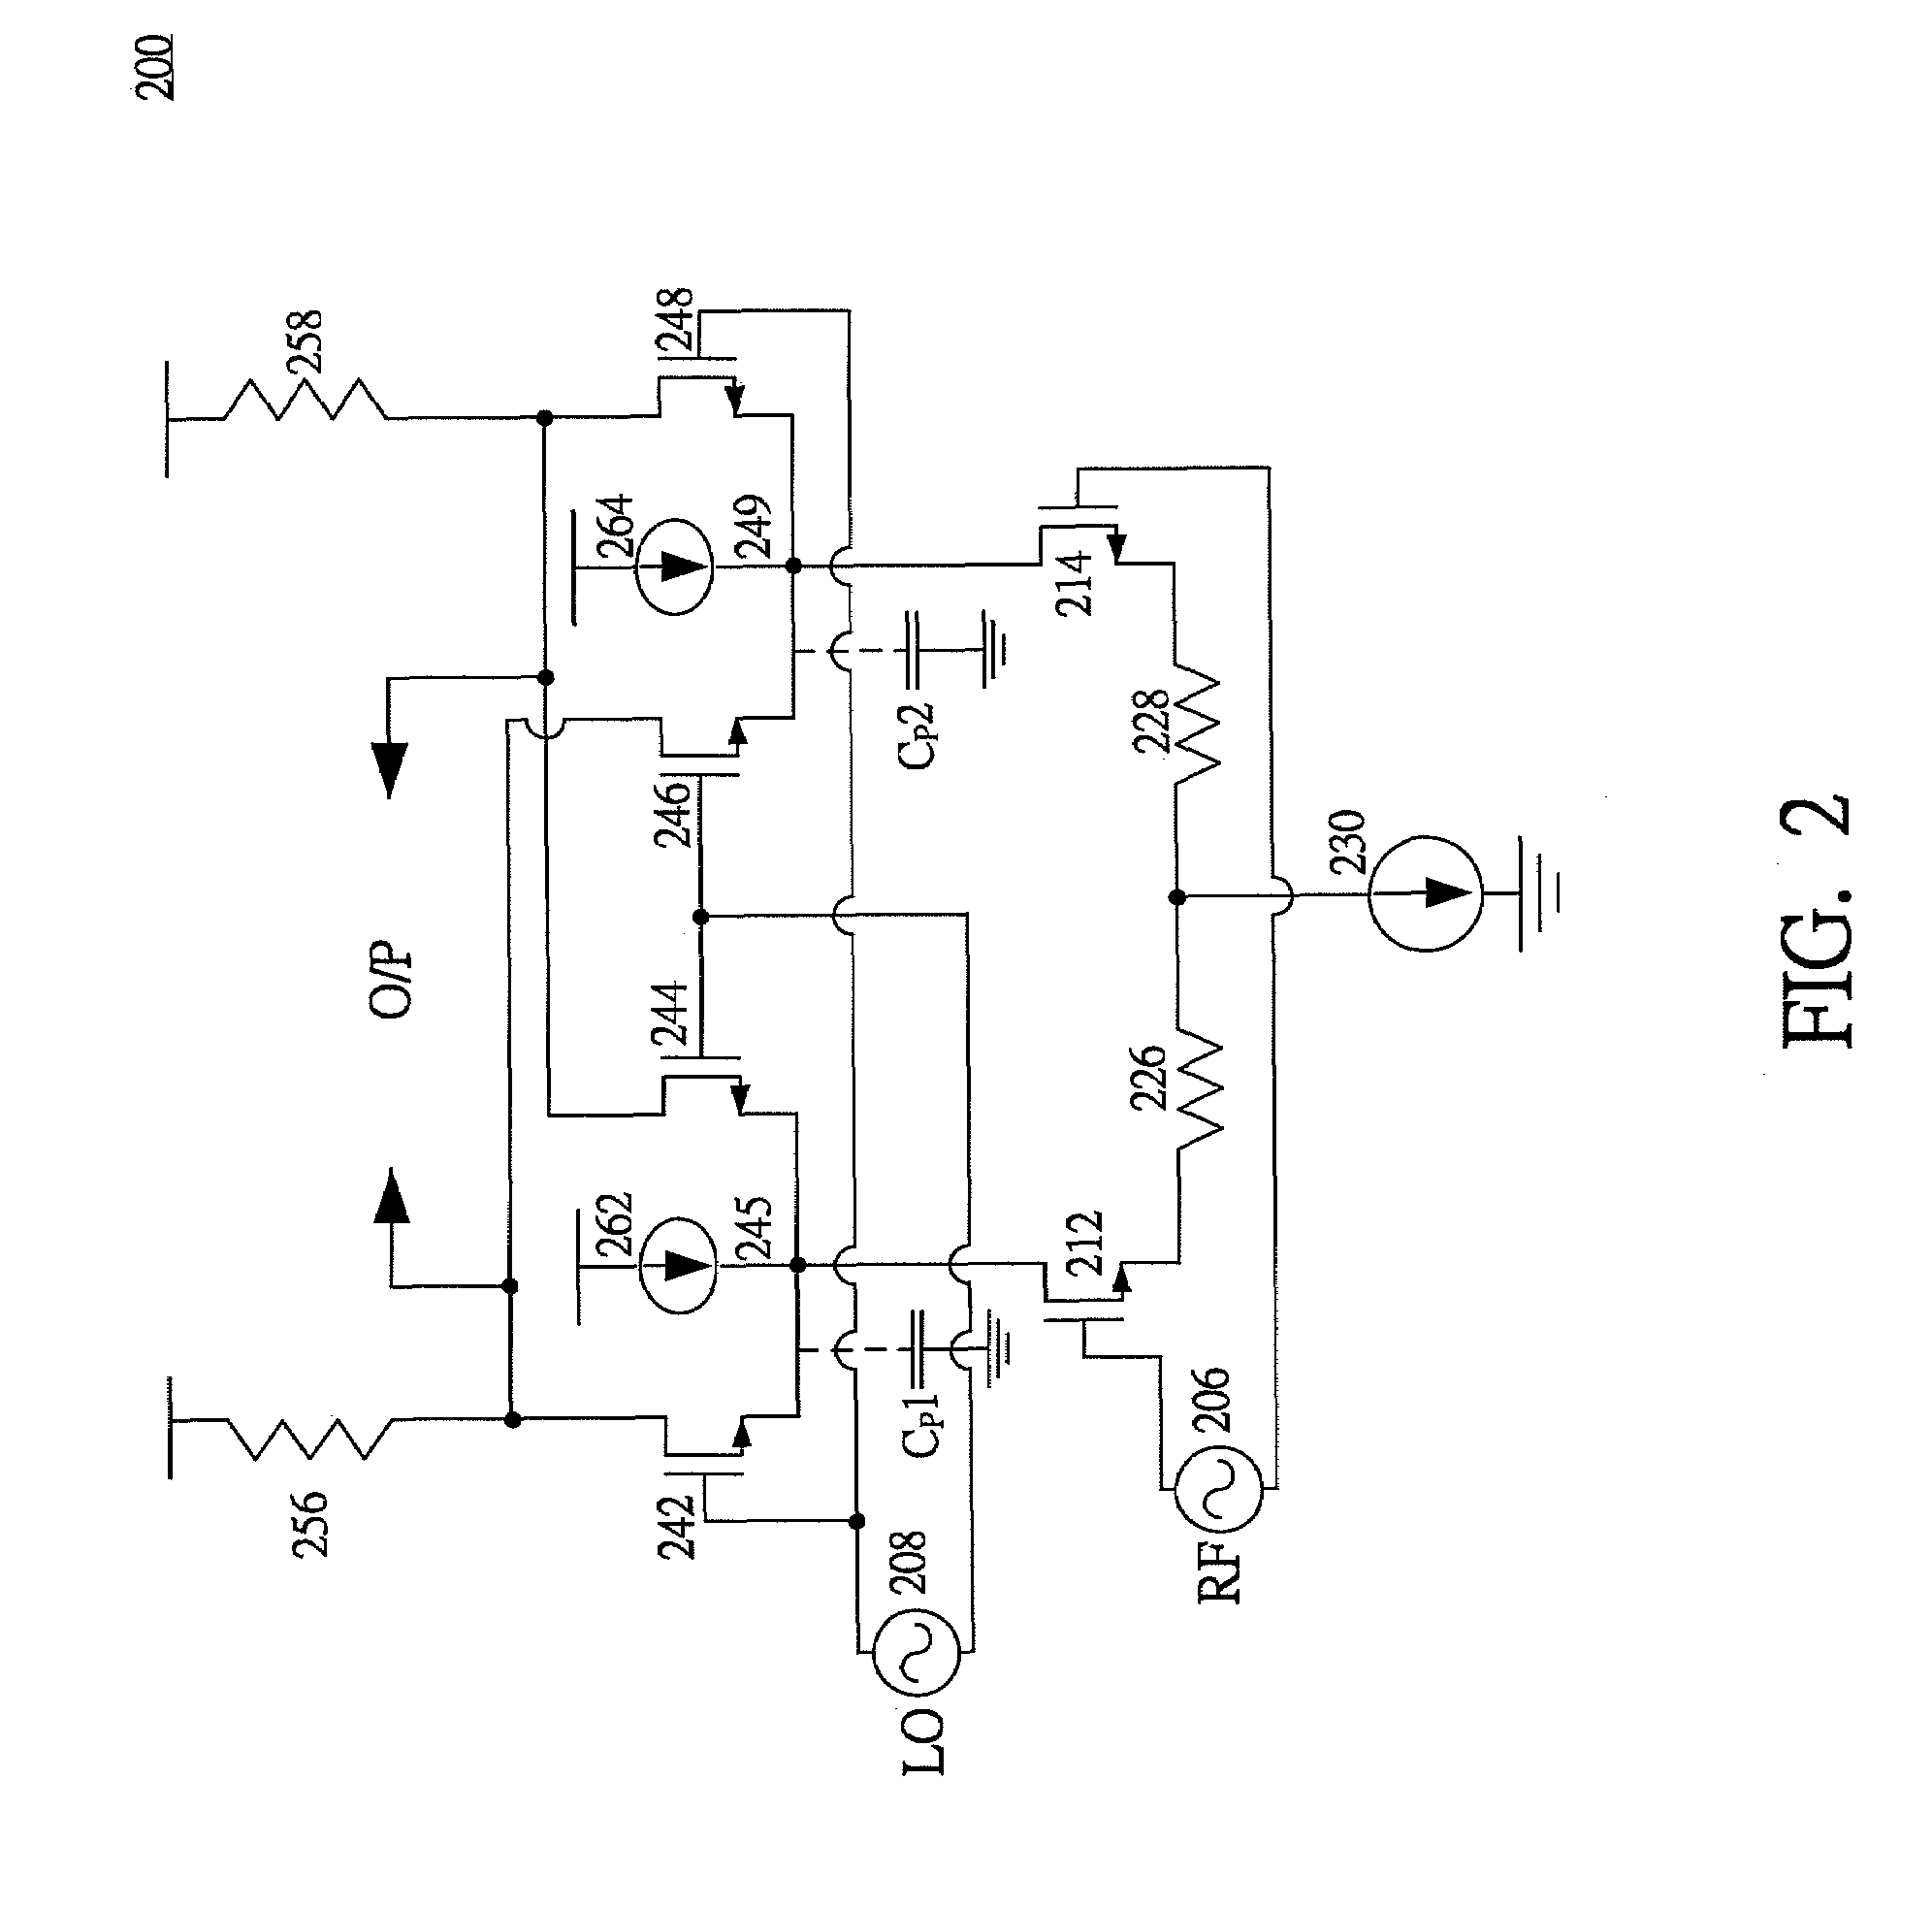 Low noise mixer with reduced distortion